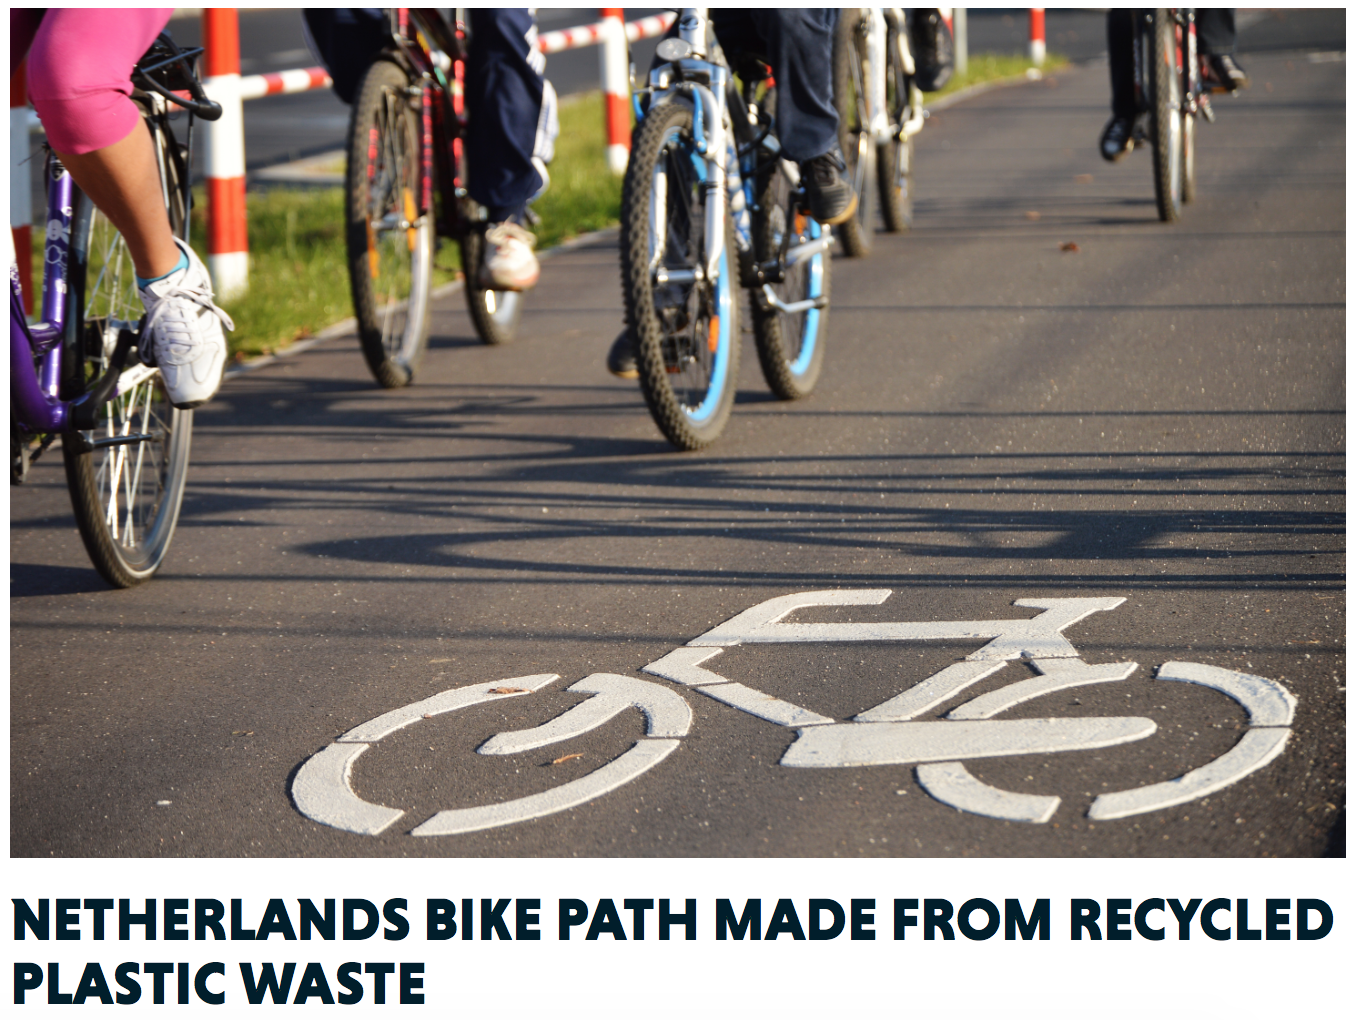 Check Out The Bike Path In The Netherlands - Made From Plastic